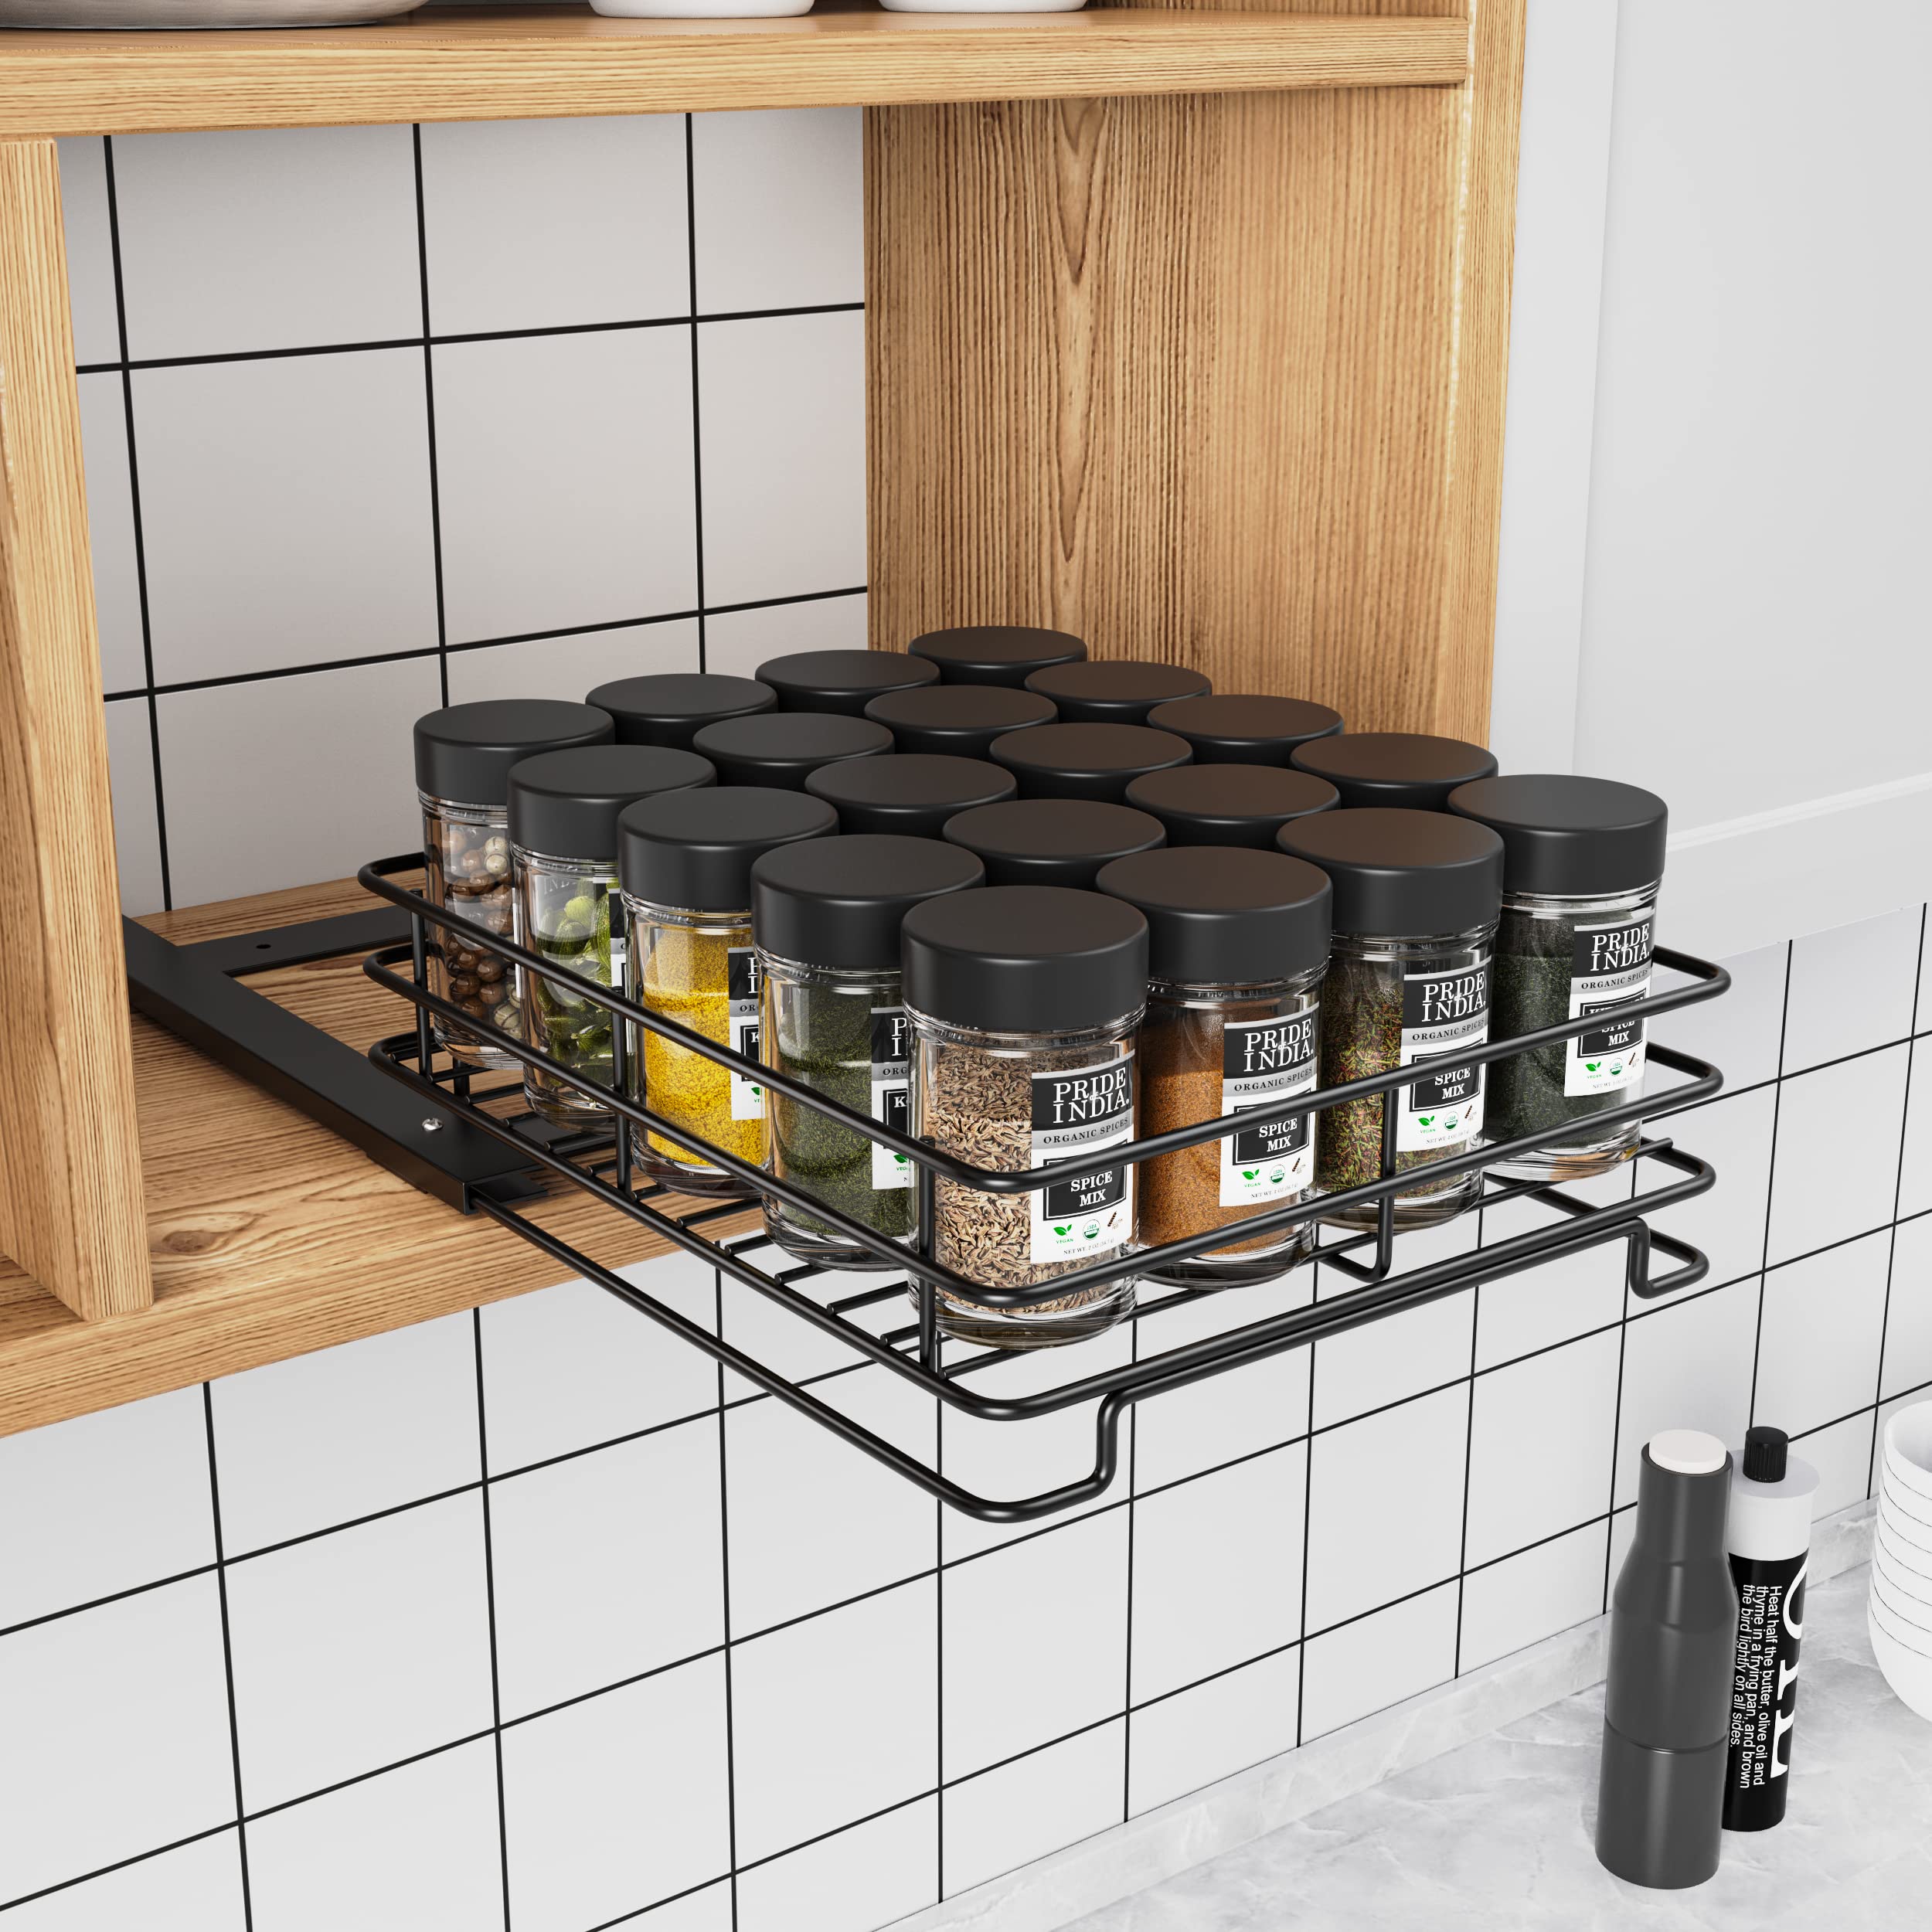 Planning-to-Make-a-Pull-Out-Spice-Rack-Cabinet